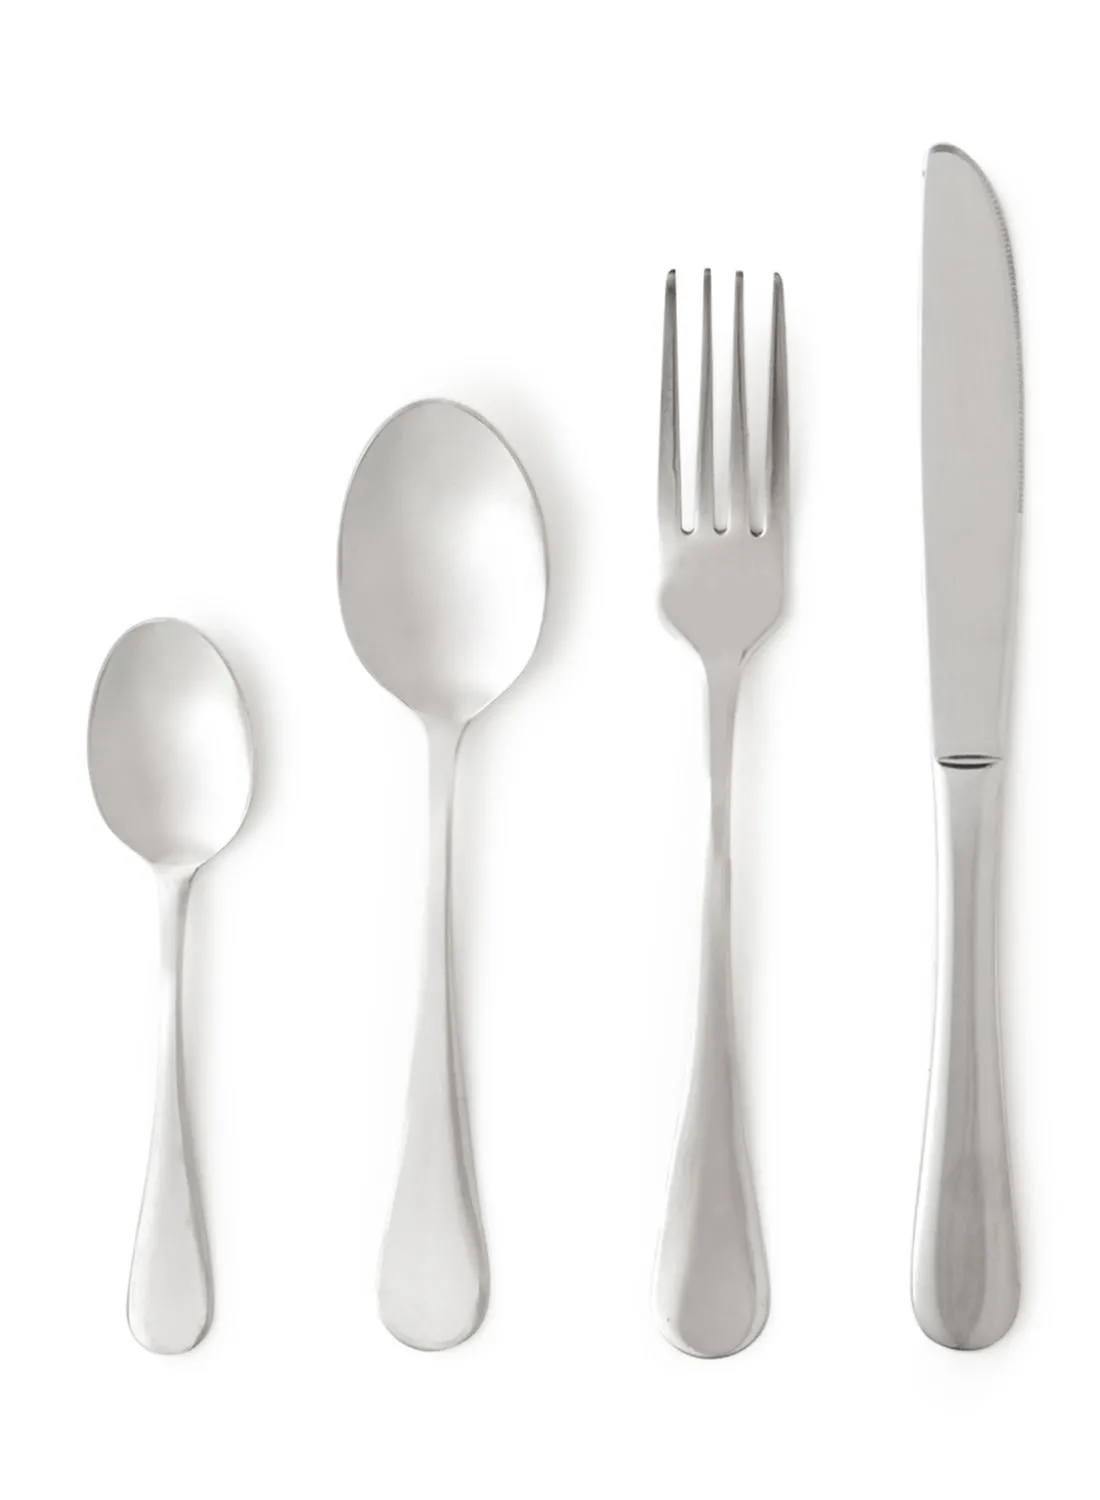 noon east 16 Piece Cutlery Set - Made Of Stainless Steel - Silverware Flatware - Spoons And Forks Set, Spoon Set - Table Spoons, Tea Spoons, Forks, Knives - Serves 4 - Design Silver Melody